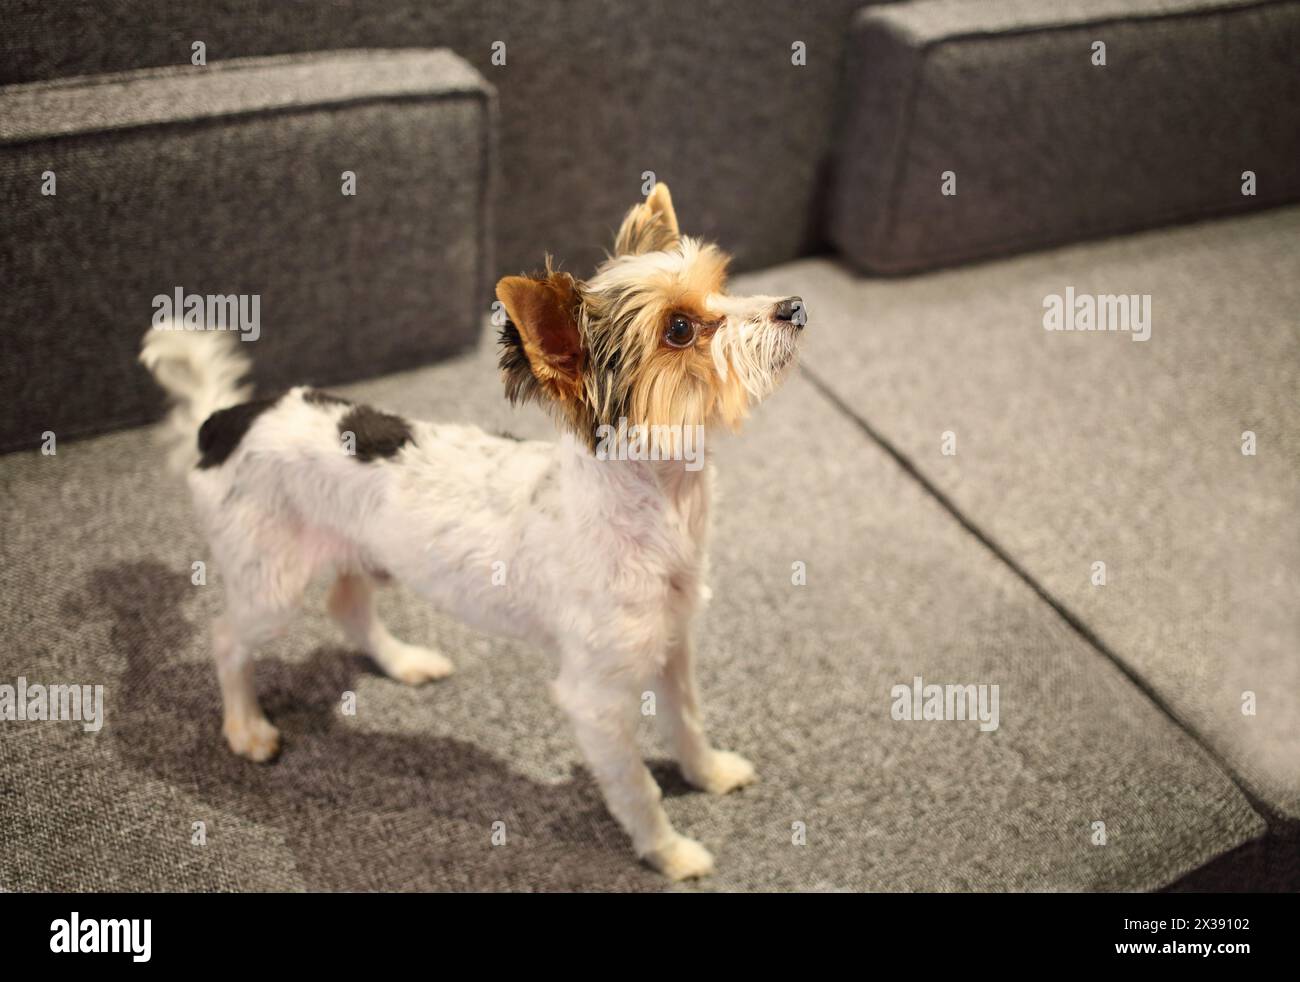 Sheared Yorkshire terrier with a raised muzzle standing on couch Stock Photo